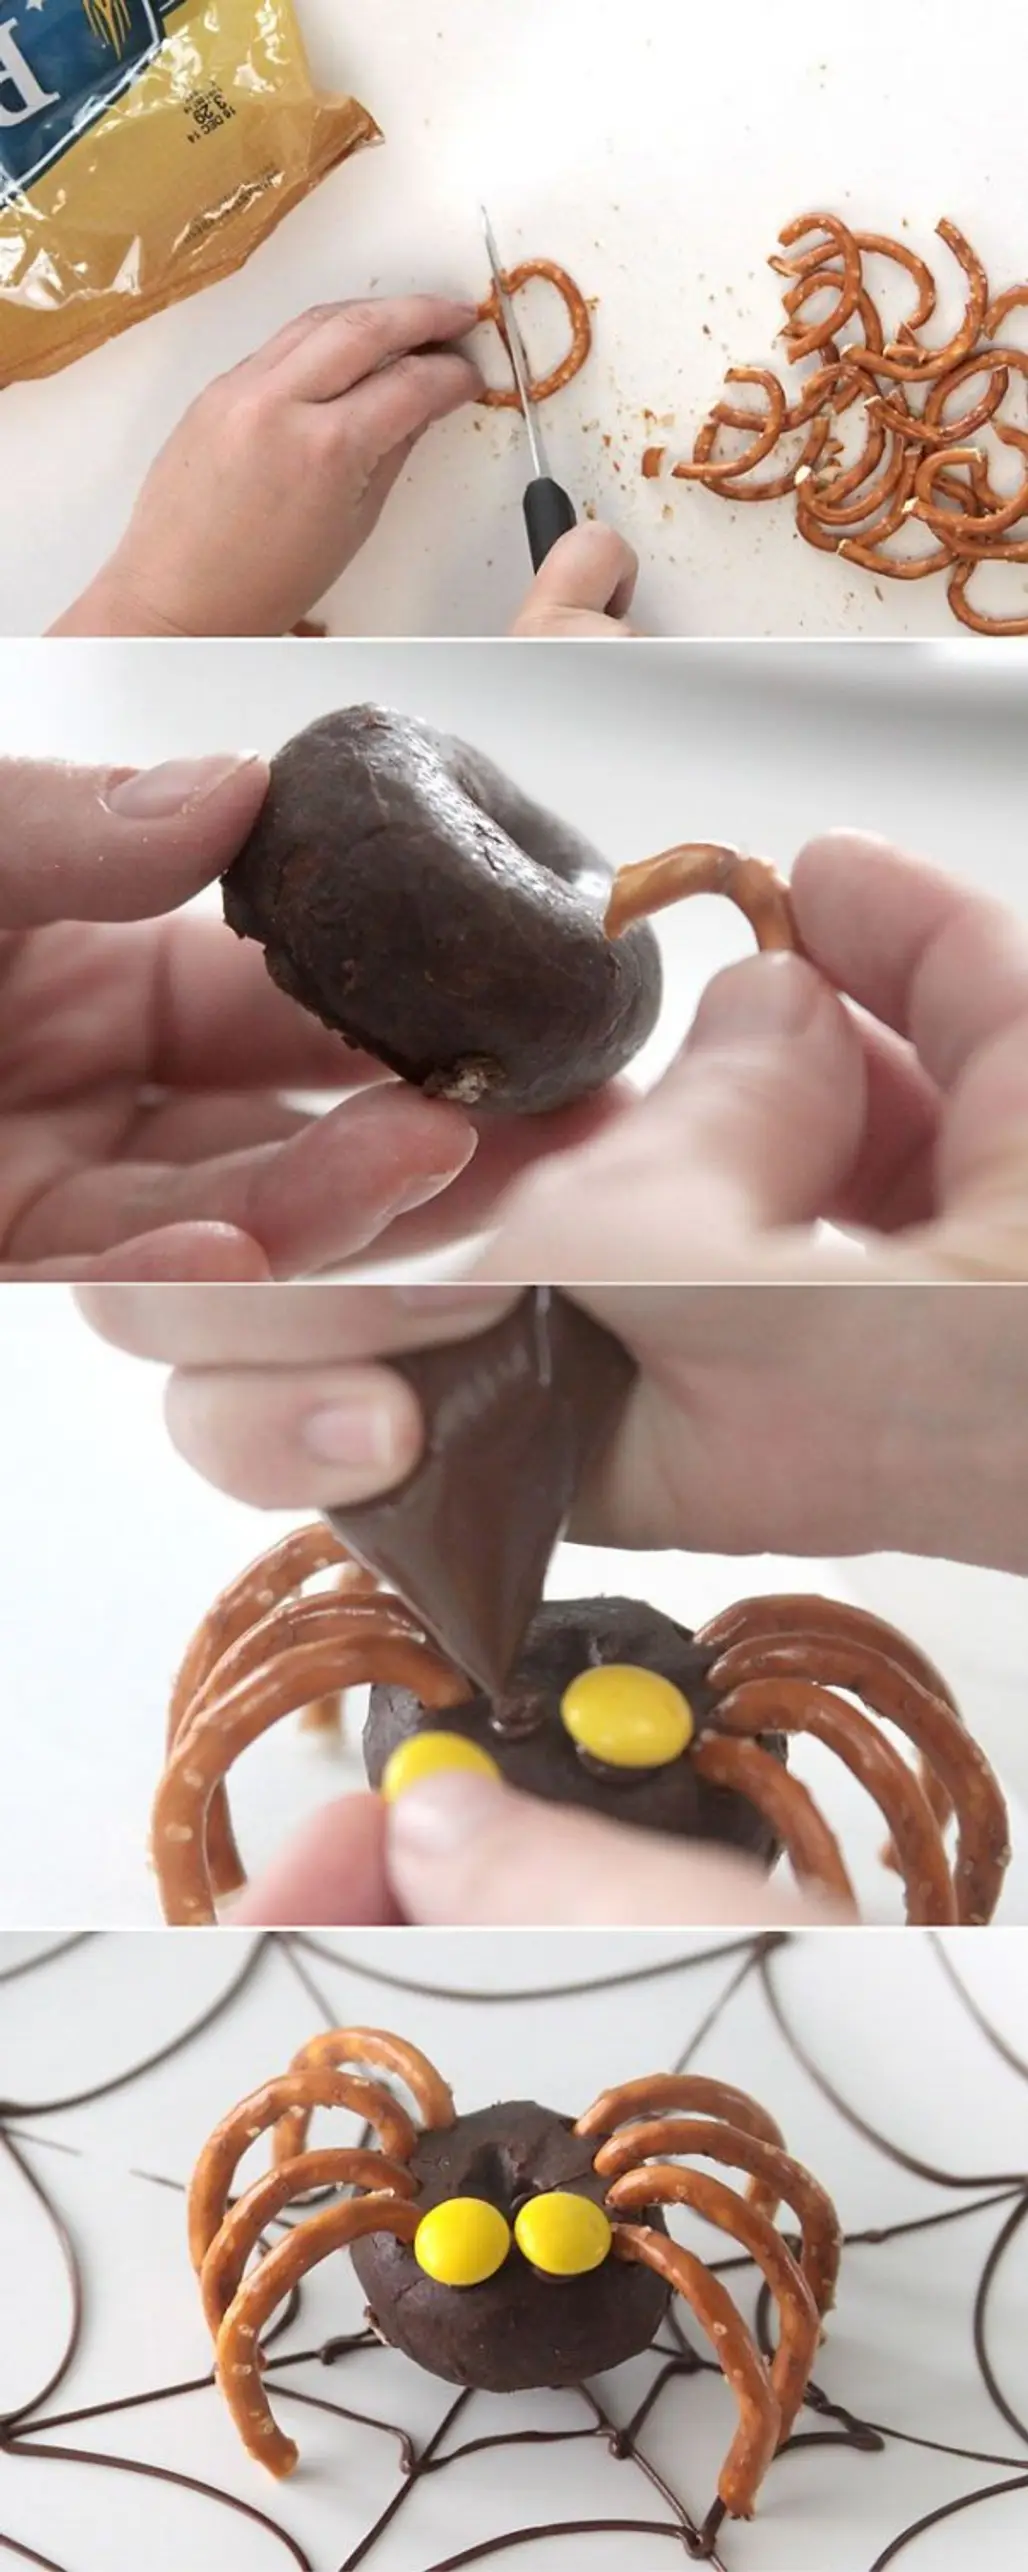 Creep Someone out with an Edible Spider